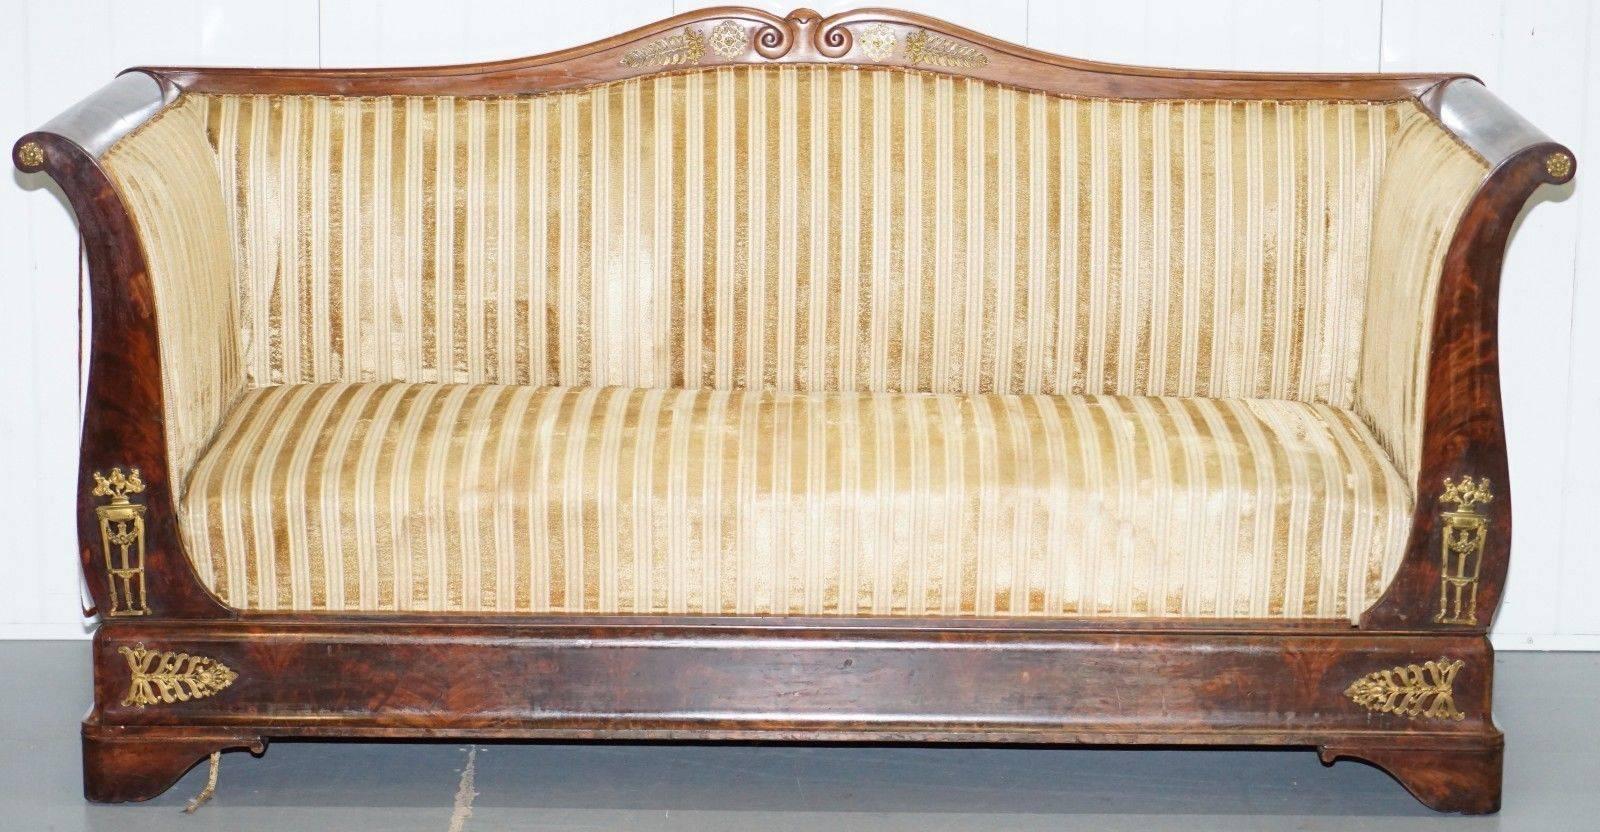 We are delighted to offer for sale this Biedermeier gilt metal mounted scroll arm mahogany framed sofa in the French Empire taste
 
A truly stunning piece, this sofa looks amazing from every single angle, the mahogany patina and gilt fittings